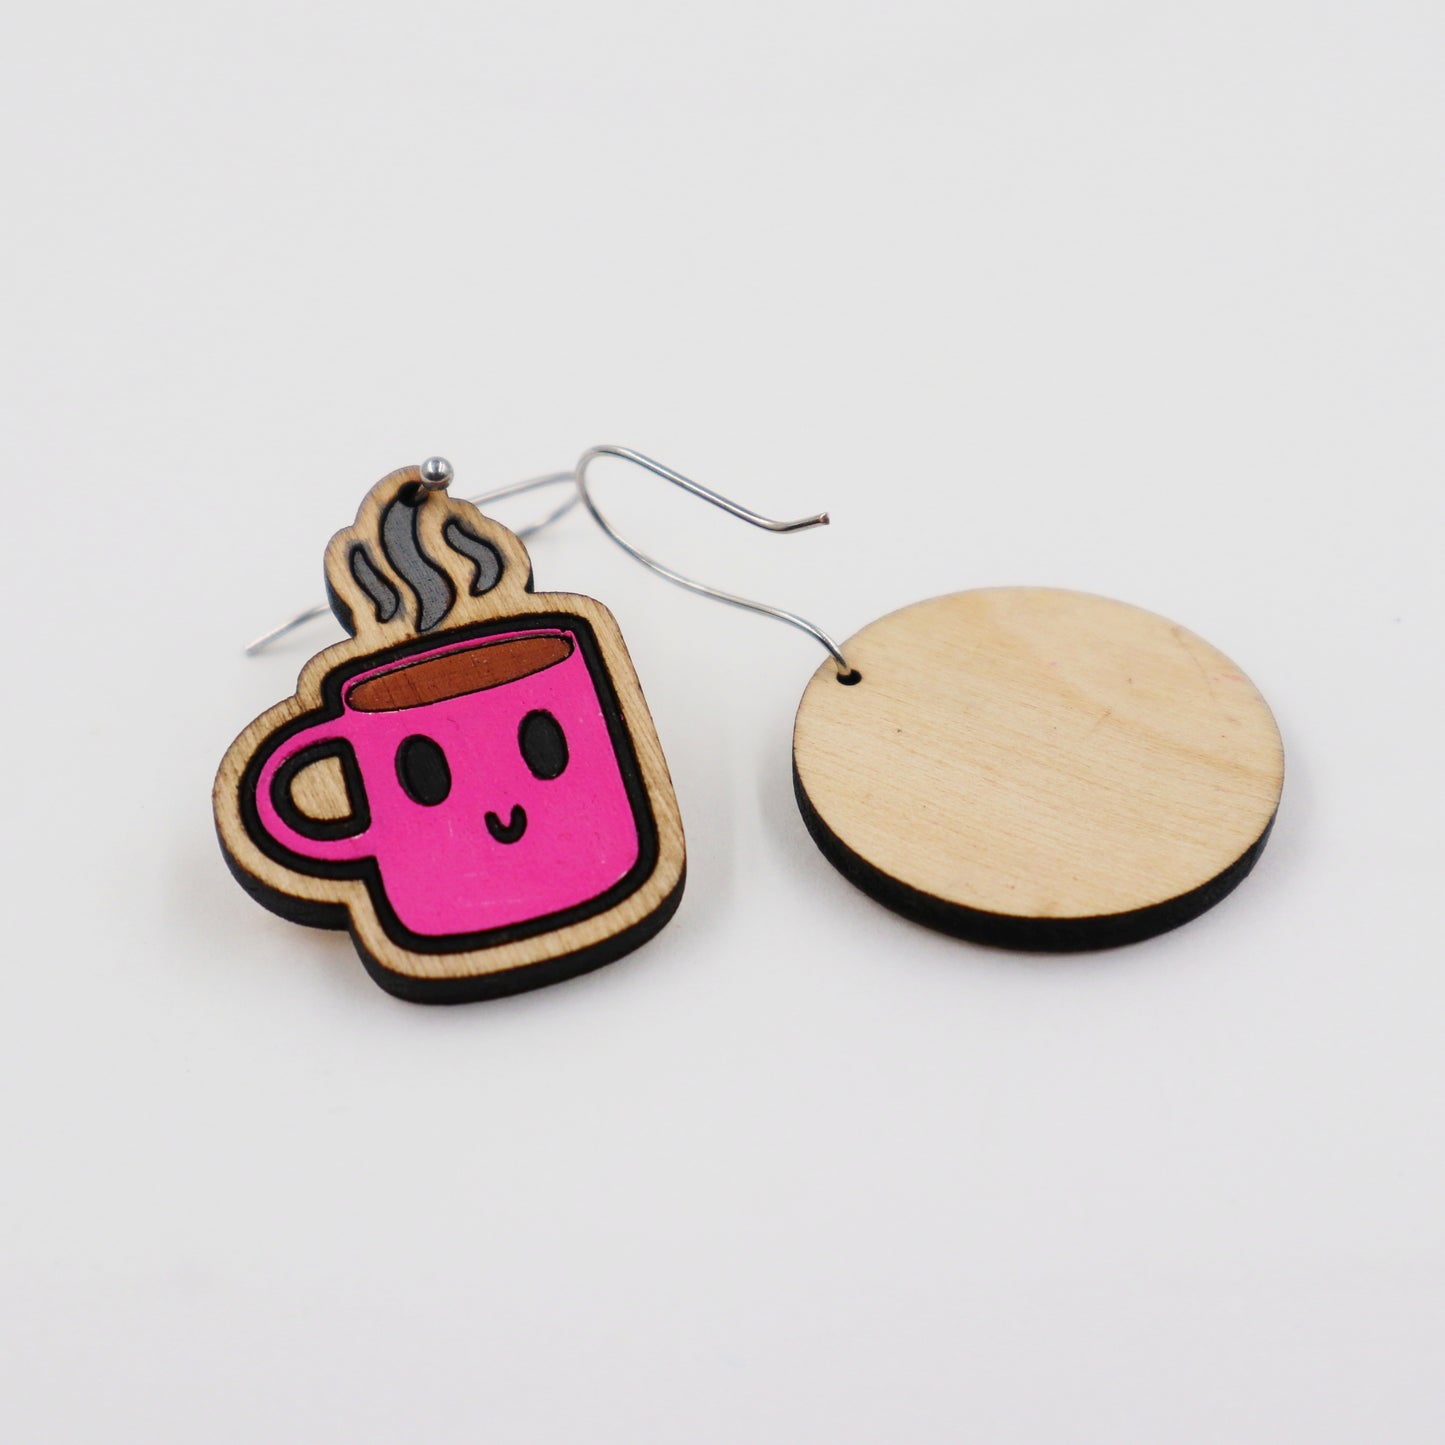 Wooden coffee and donut earrings